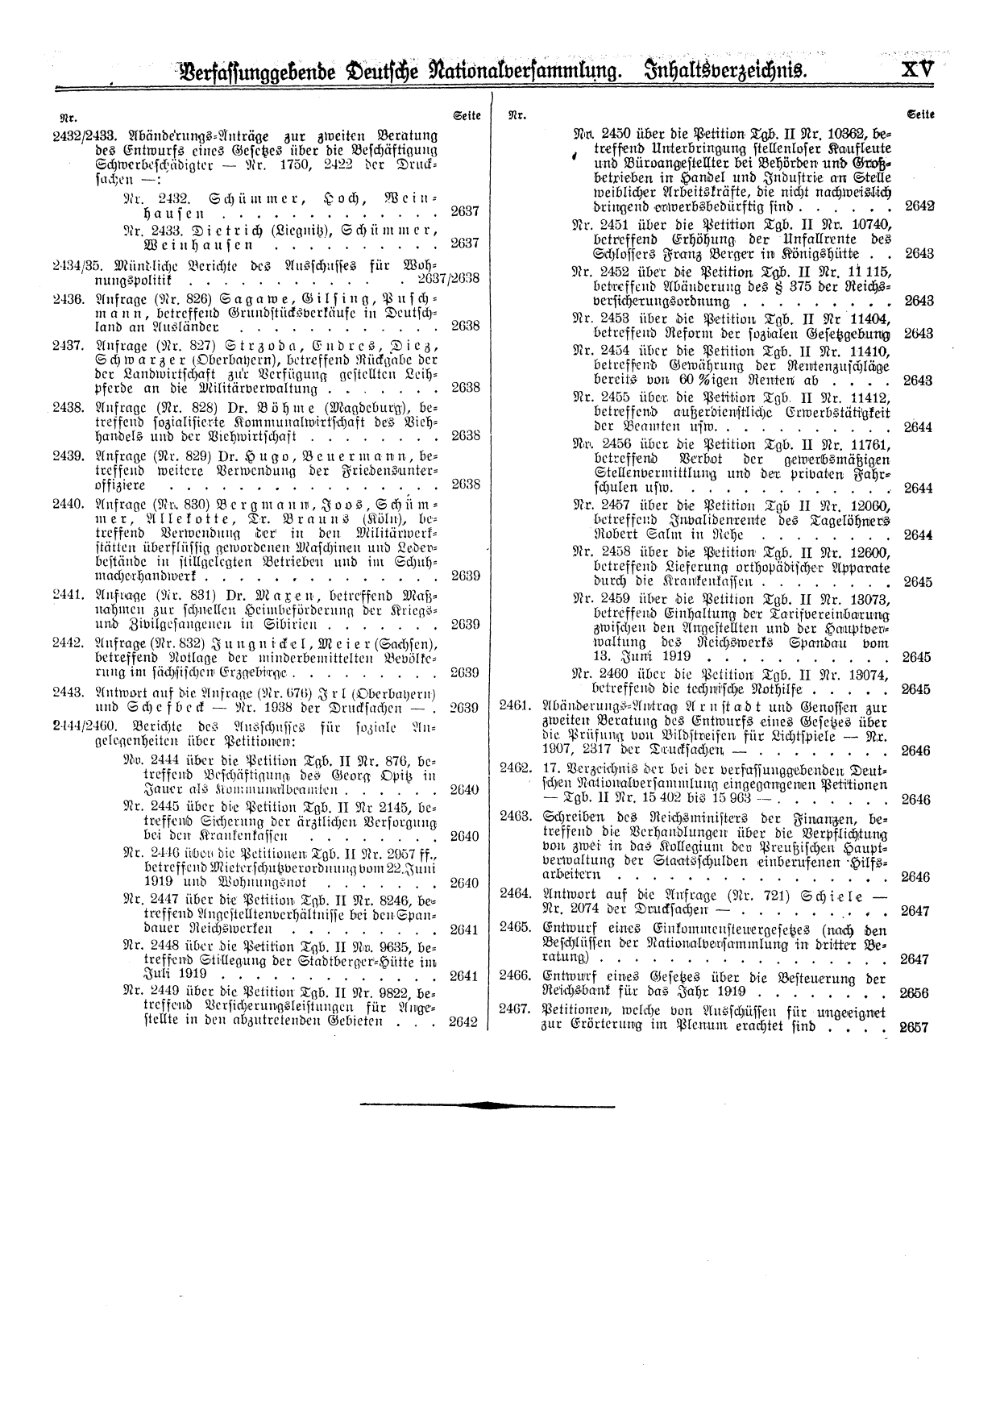 Scan of page XV